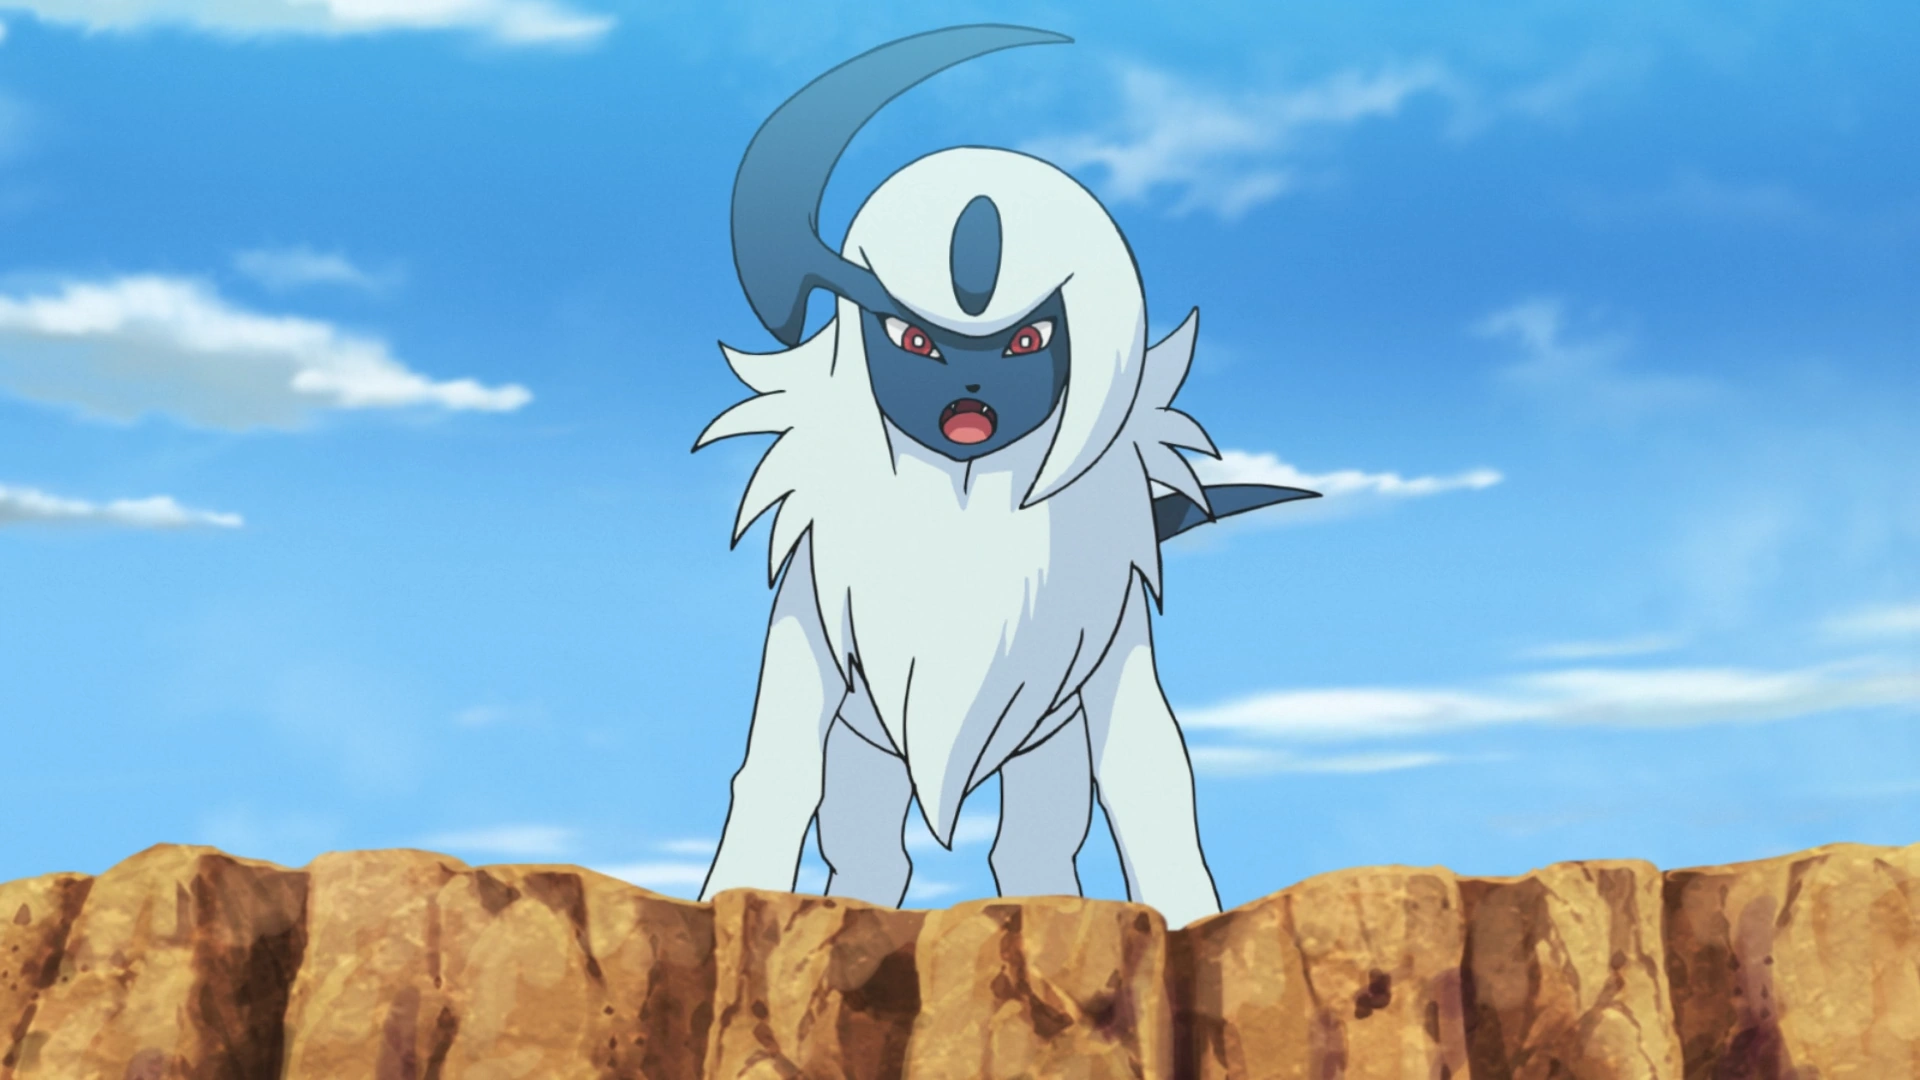 17 Facts About Absol - Facts.net